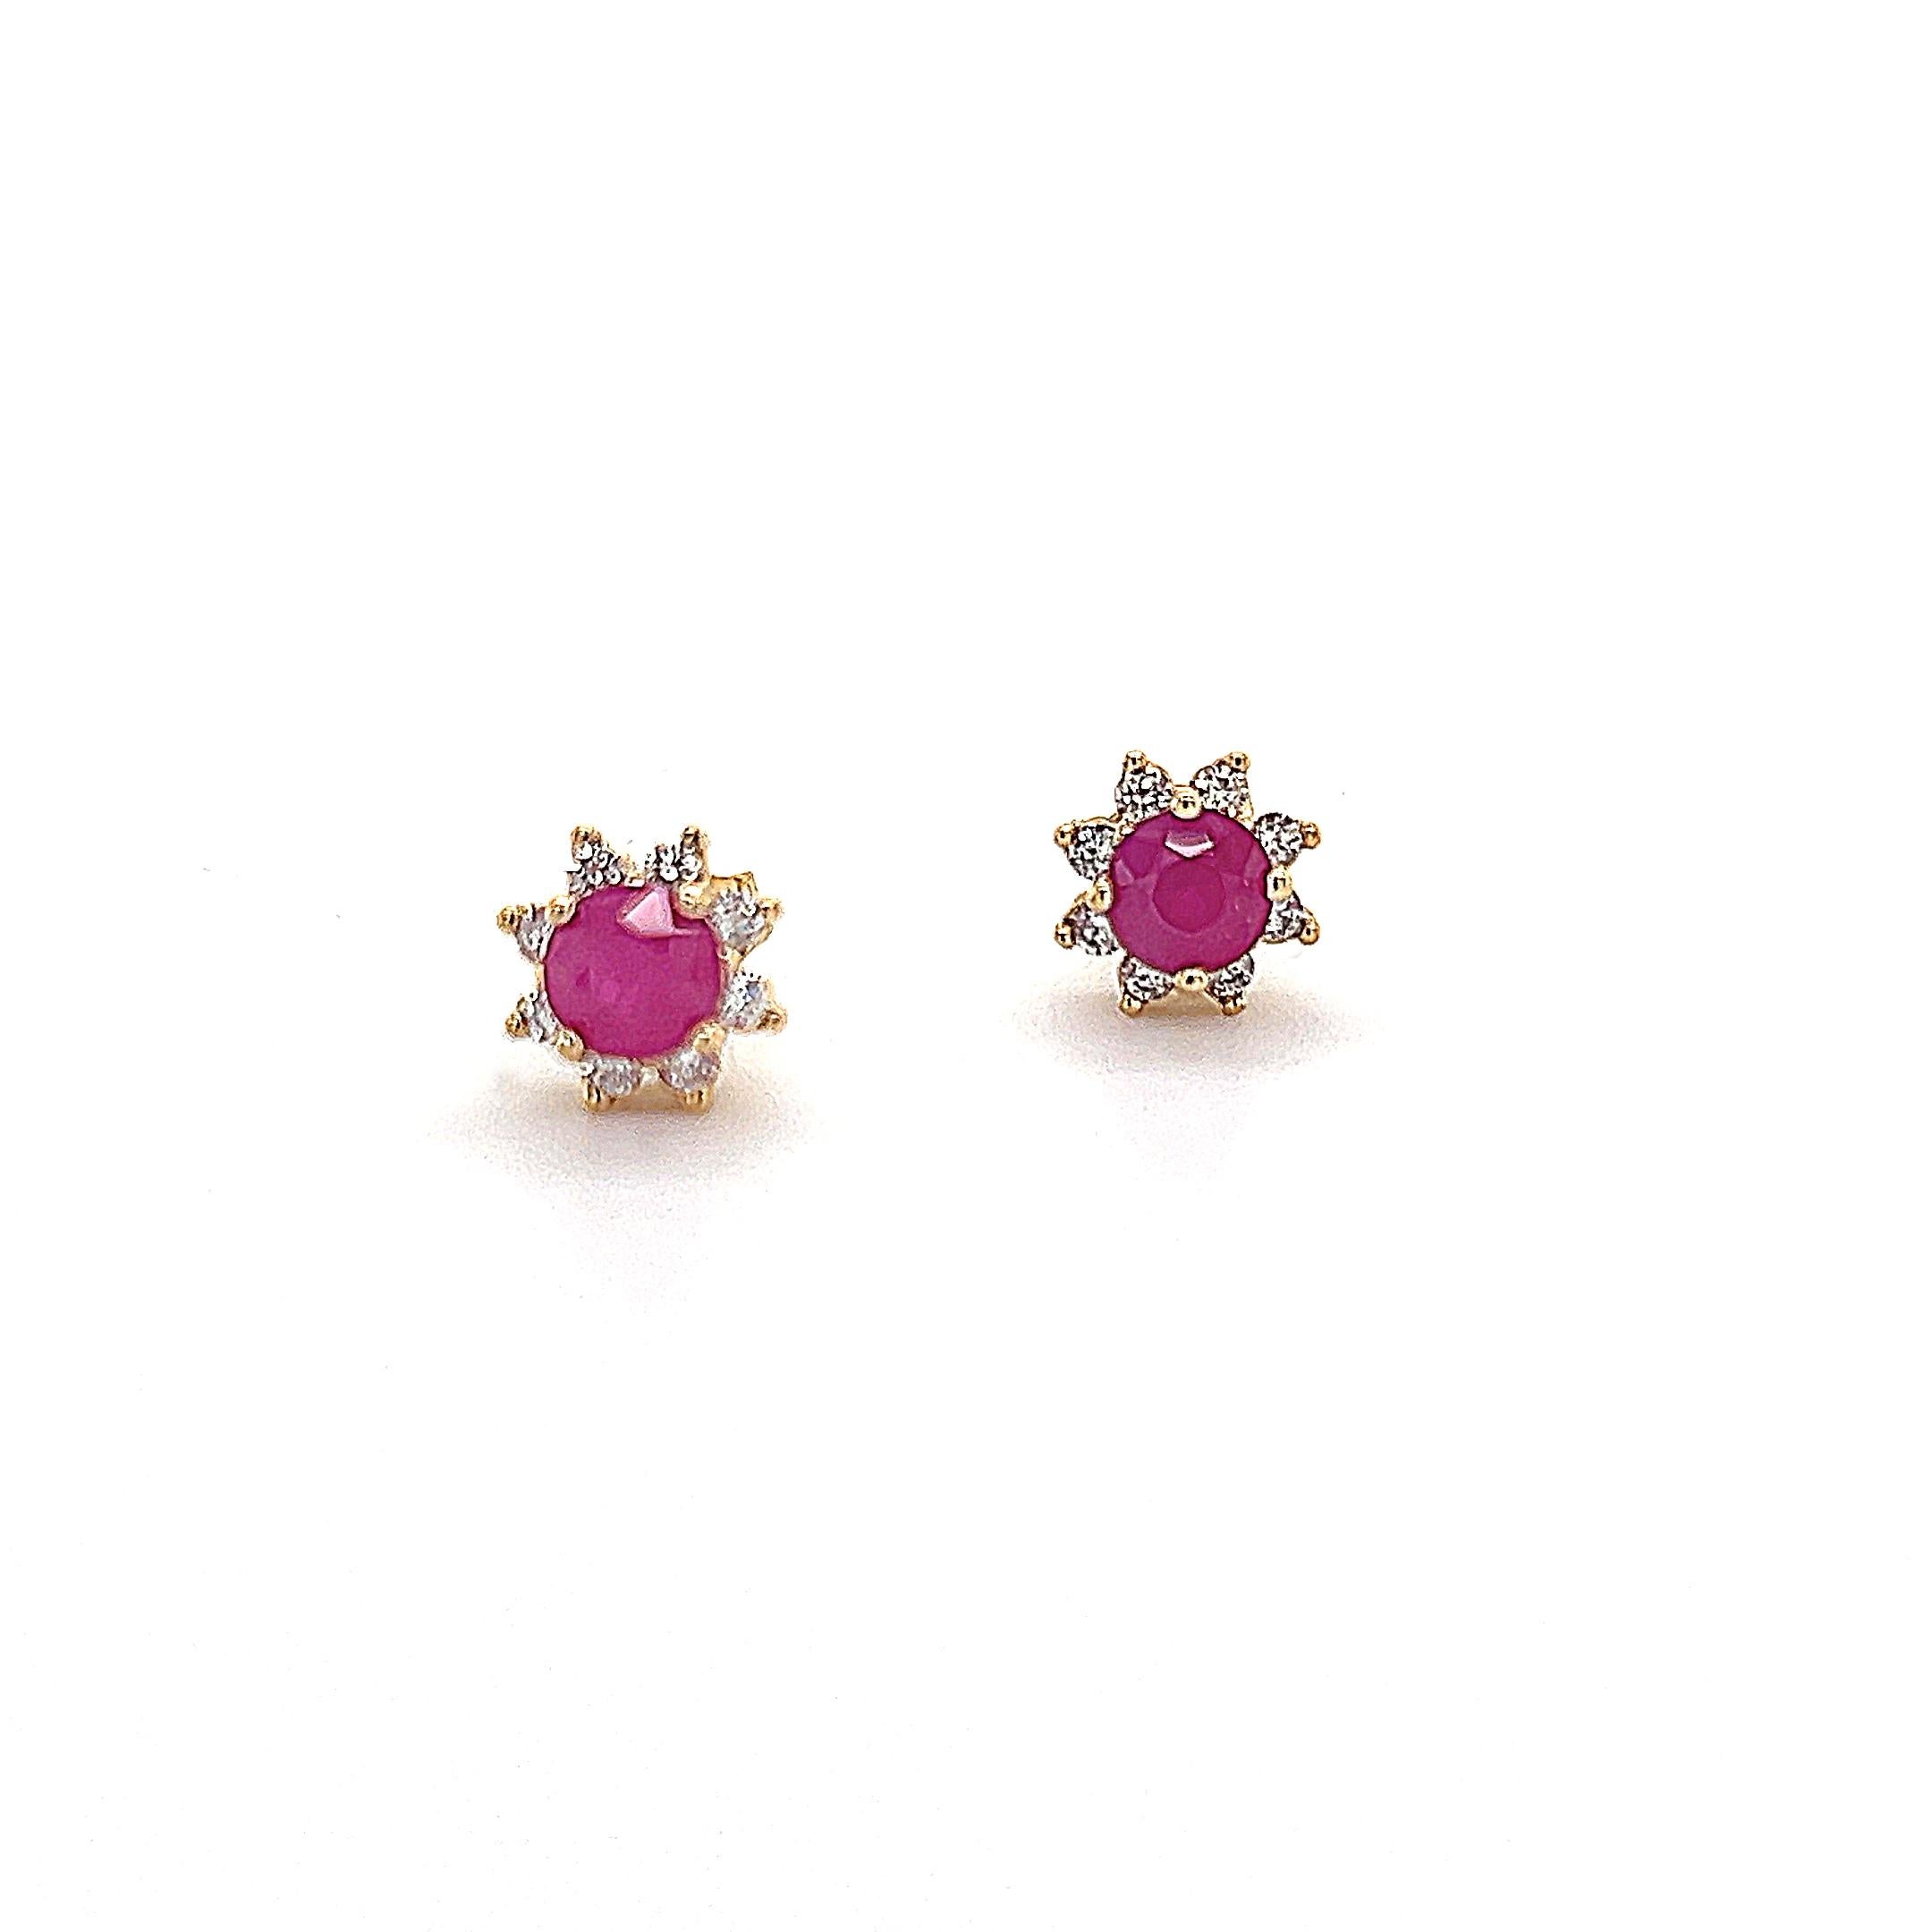 Natural Ruby Diamond Earrings 14k Gold 1.25 TCW Certified For Sale 4